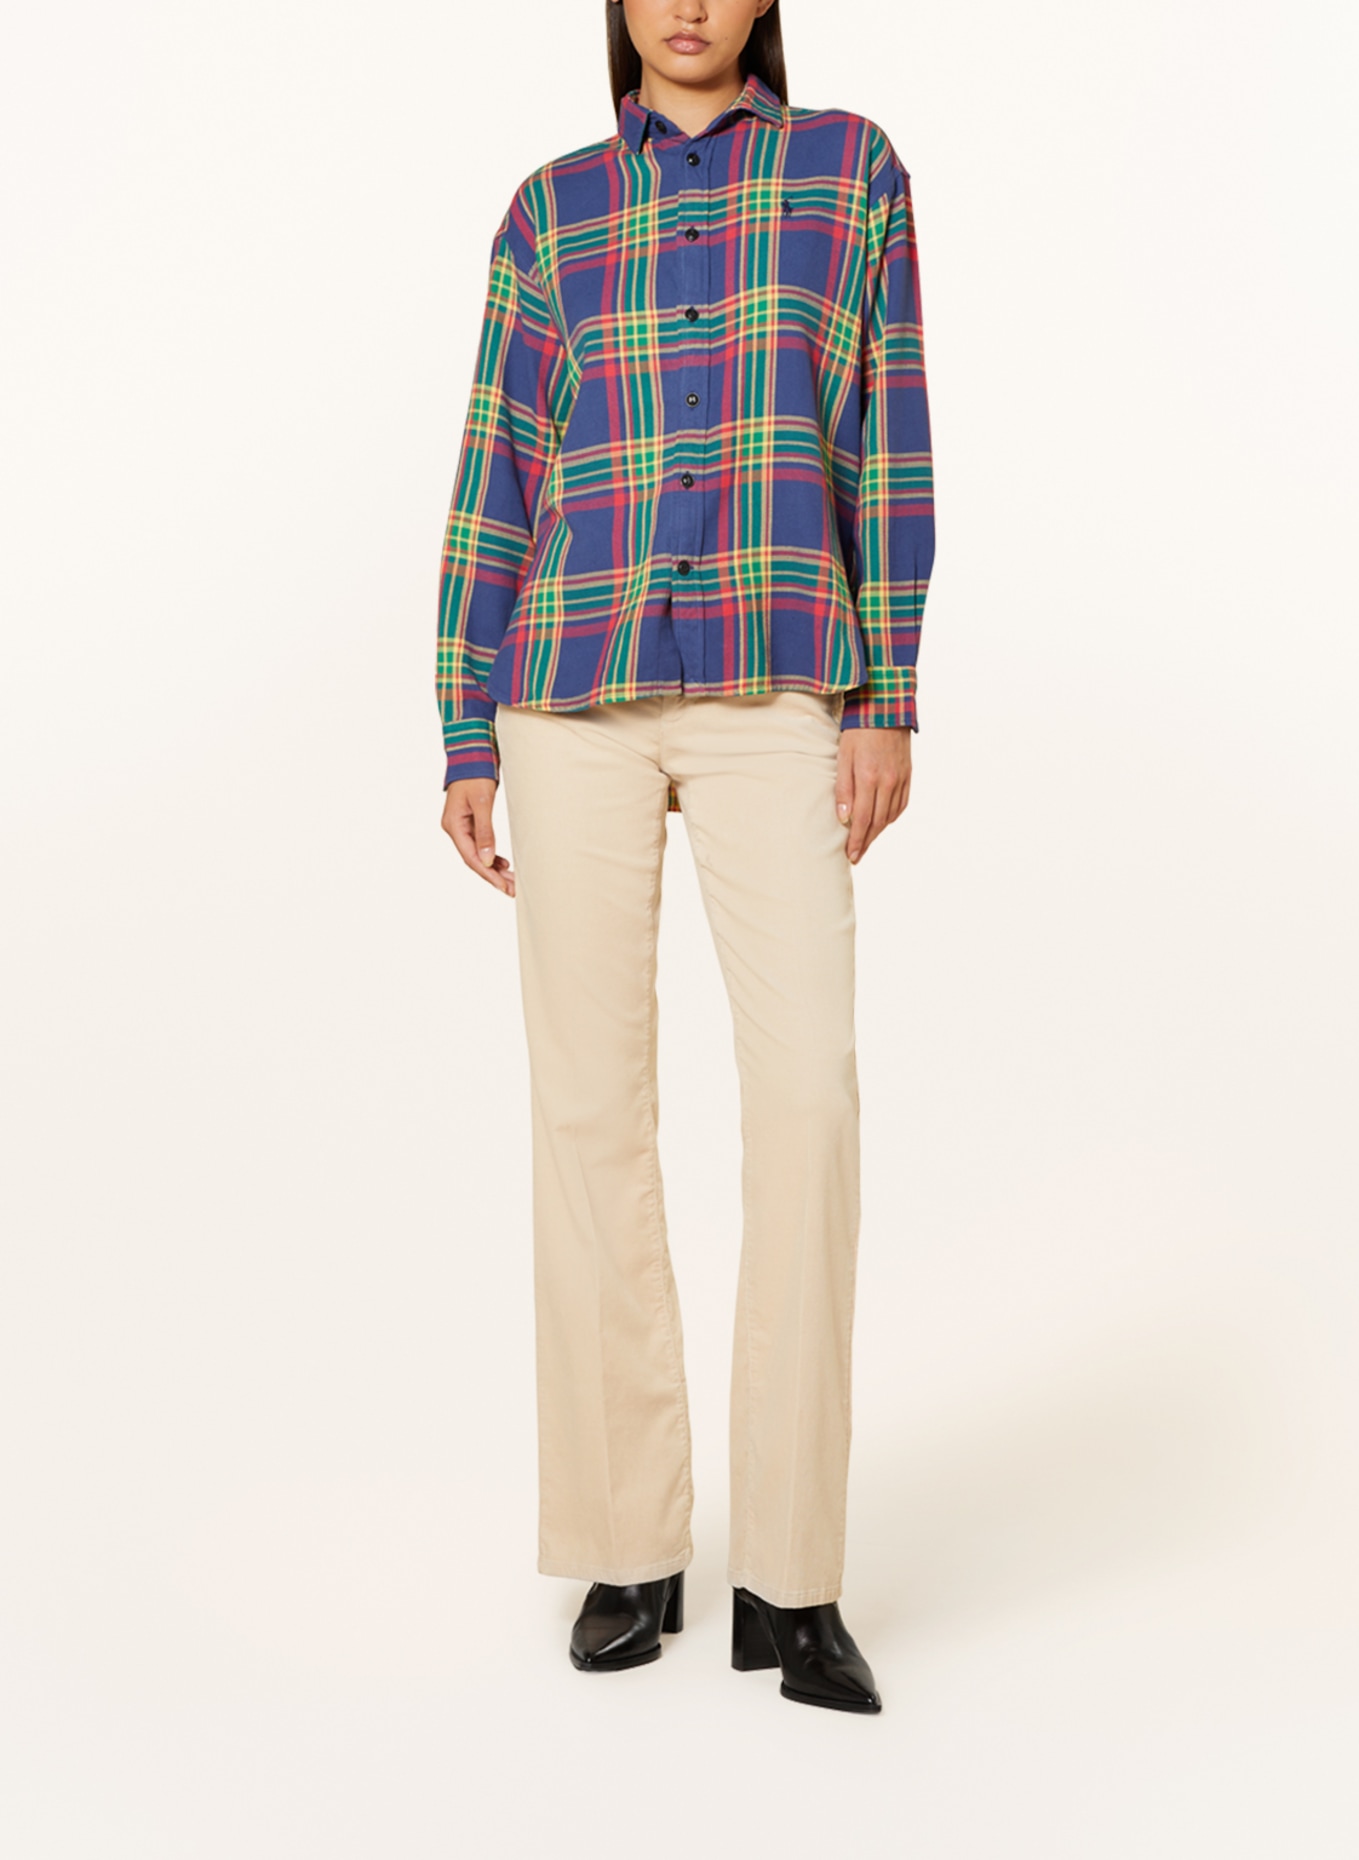 POLO RALPH LAUREN Shirt blouse in flannel, Color: BLUE/ RED/ YELLOW (Image 2)